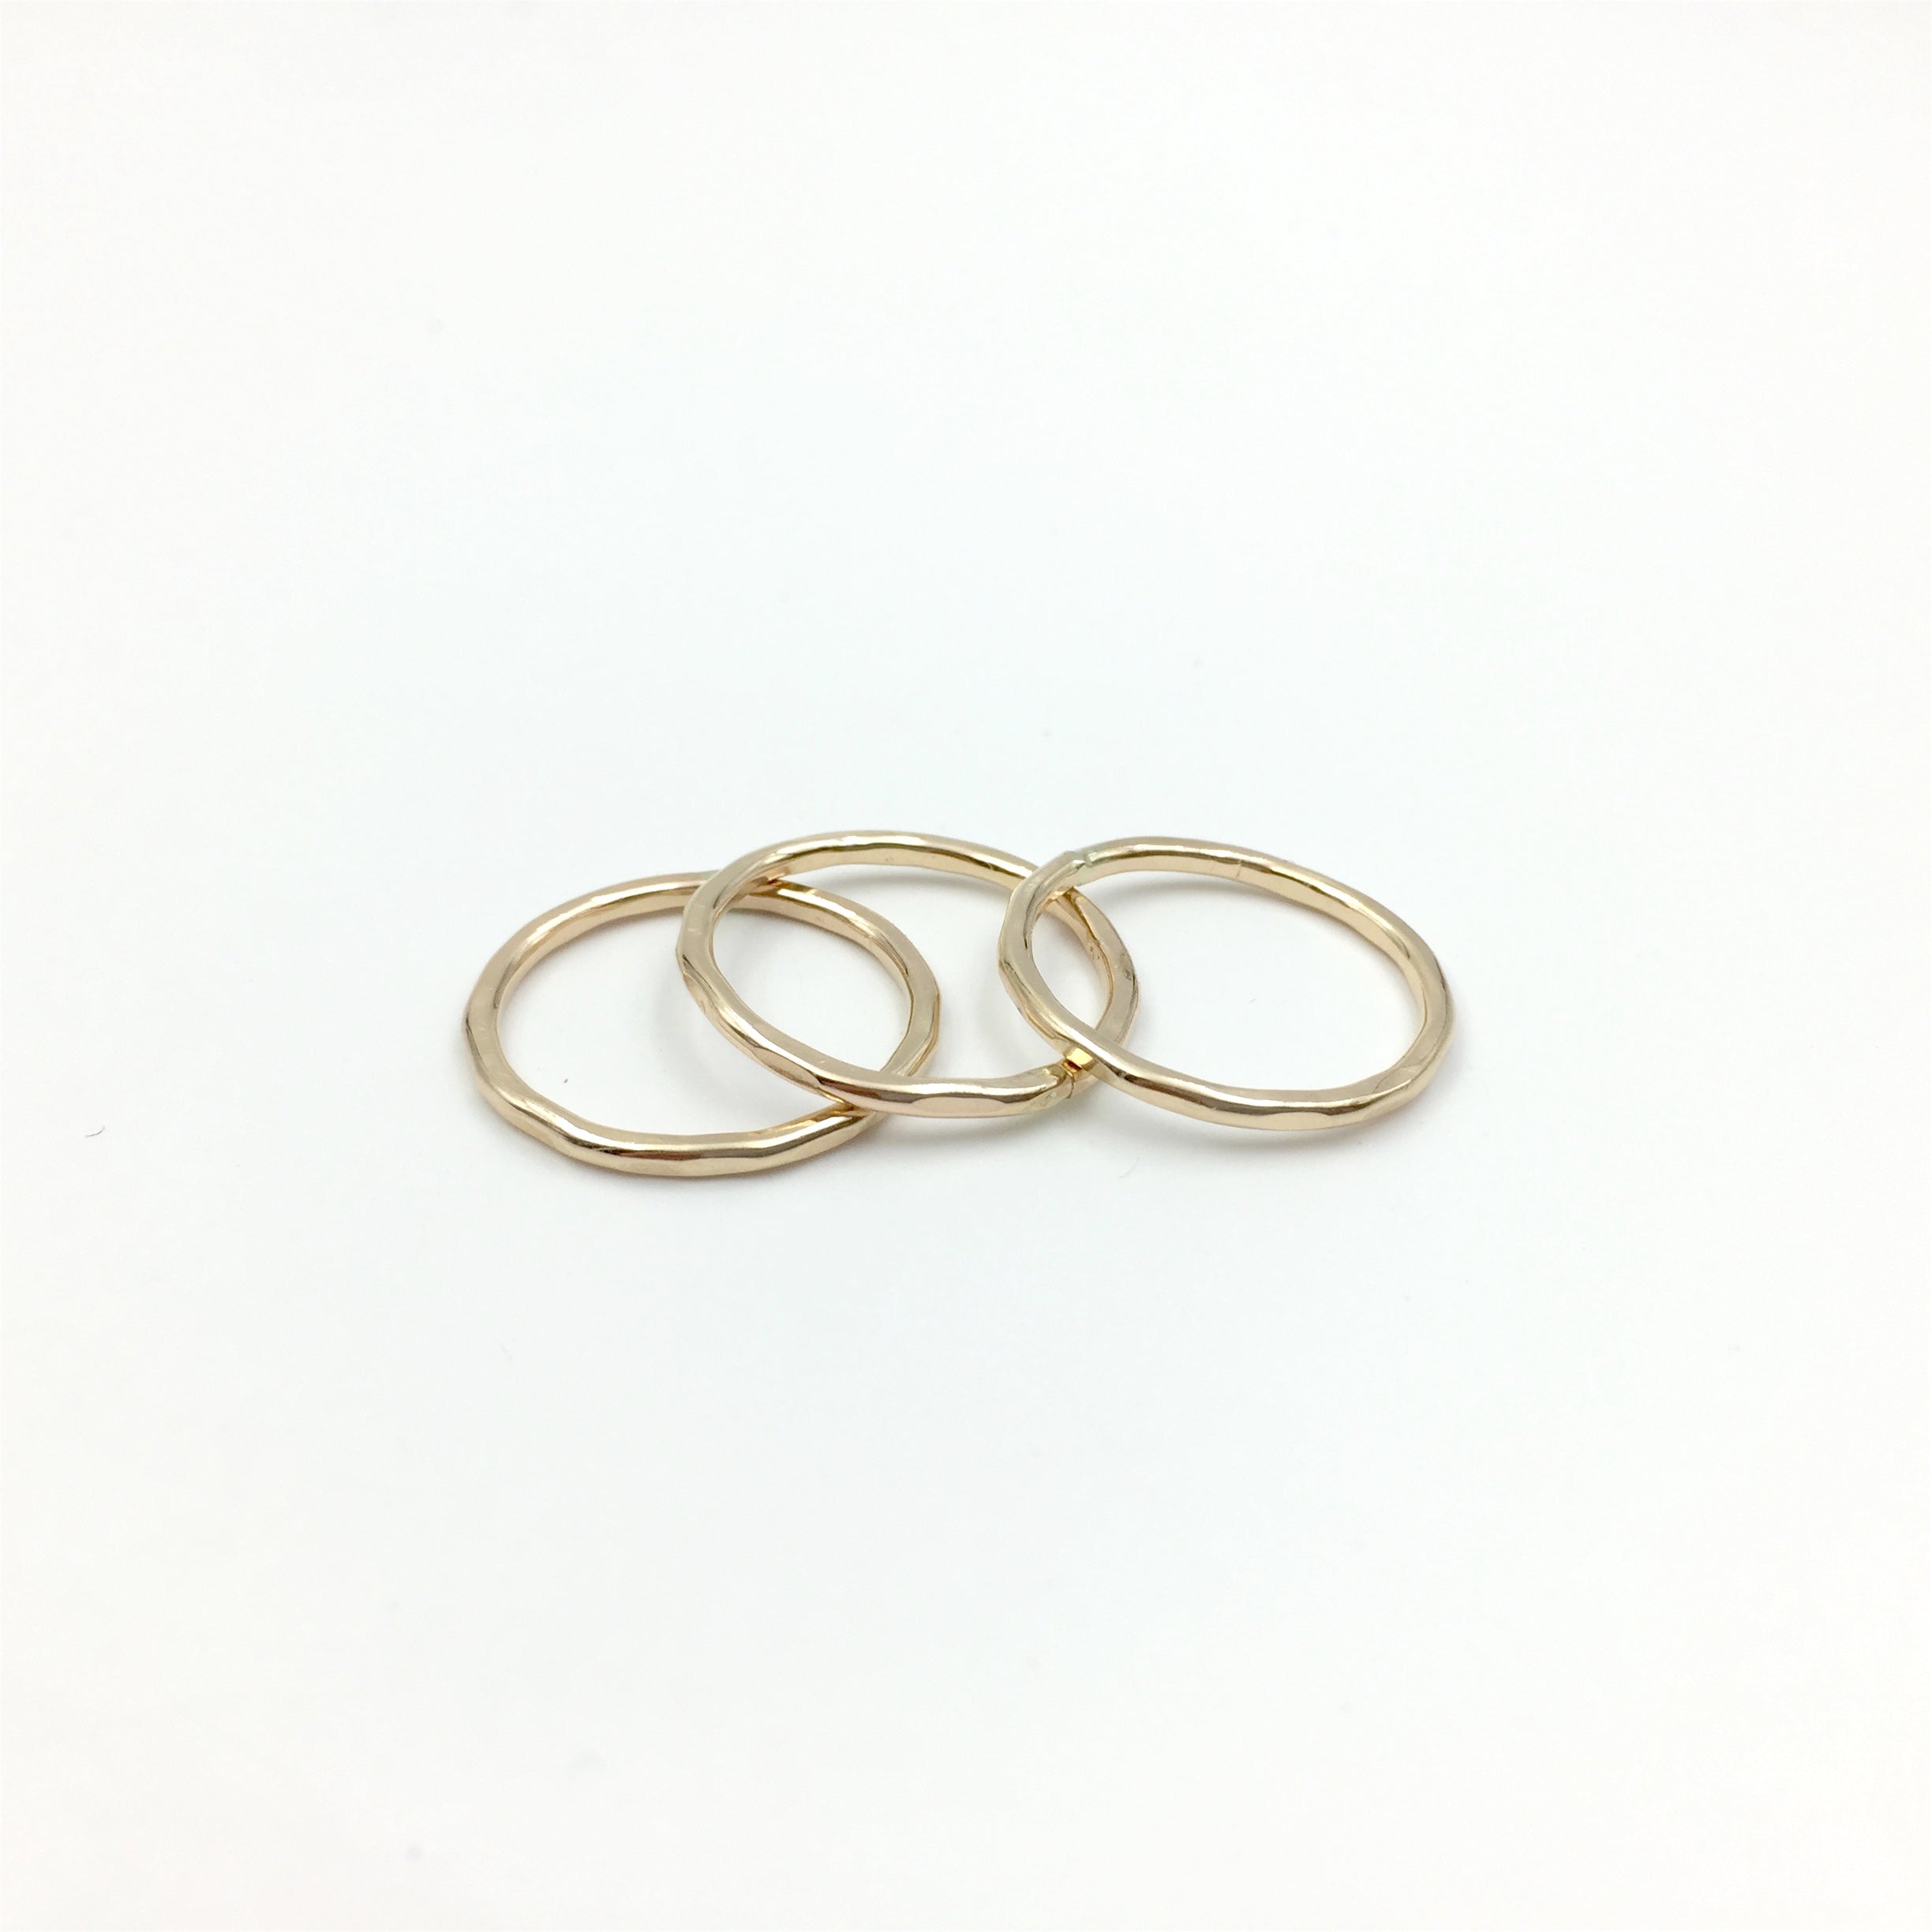 Hammered stacking rings in 14k gold fill by Knucklekiss